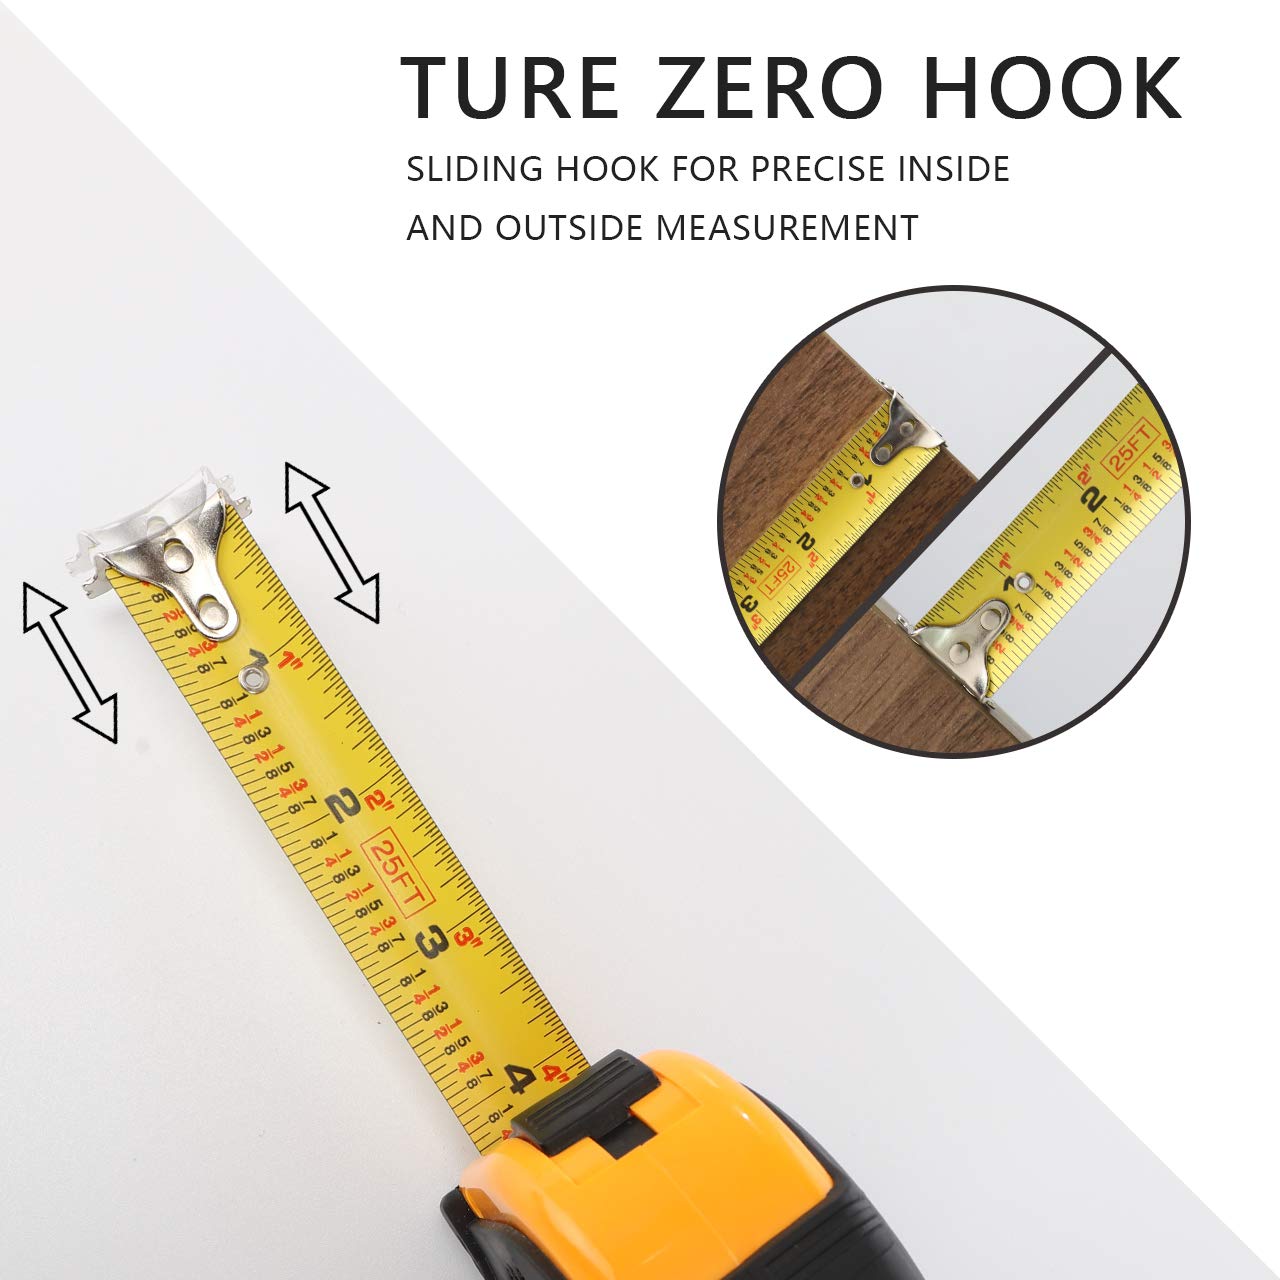 LAND 25Ft Retractable Measuring Tape - 2 Pack Heavy Duty Tape Measure, Inch/Metric Double Scale, Sturdy Matte Blade, Magnetic Hook For Measurement Alone, TPR Rubber Protective Case (25FT(2 PACK))